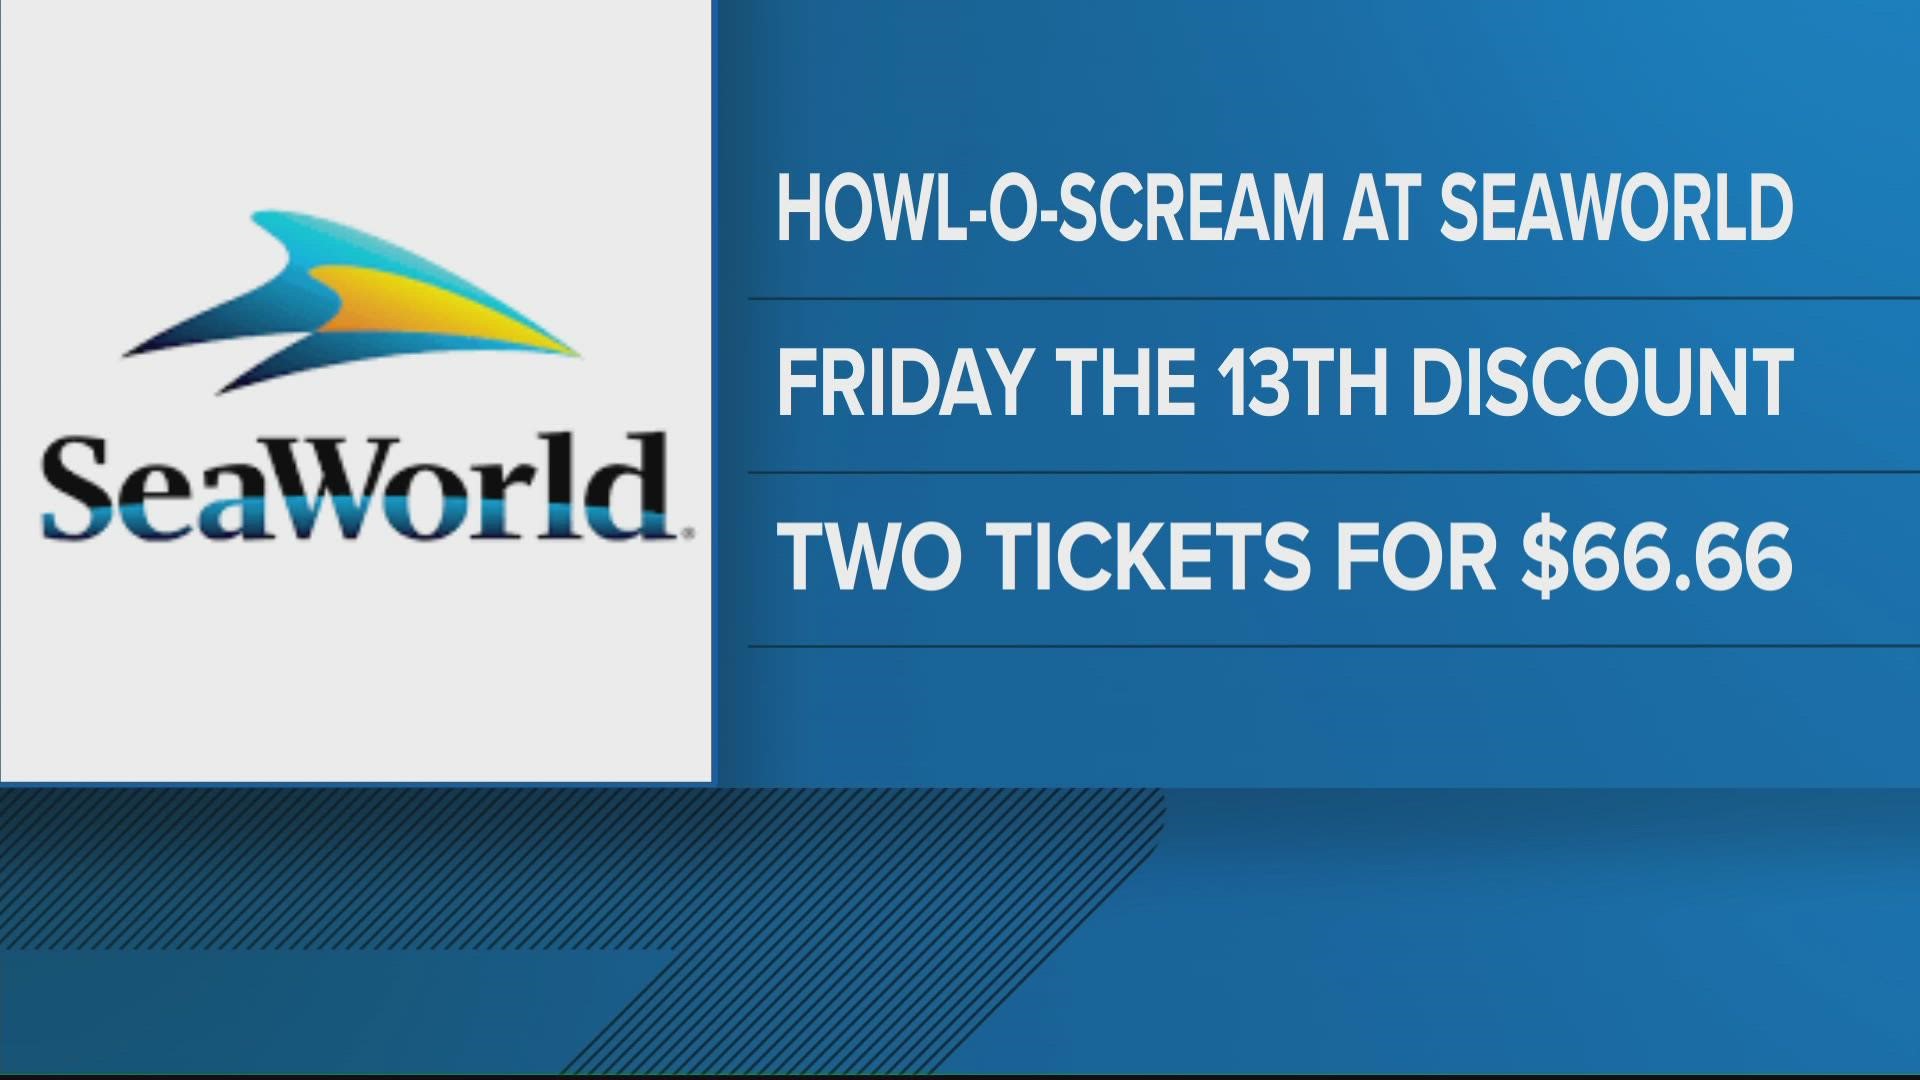 SeaWorld offering Howl-O-Scream ticket discount on Friday the 13th.